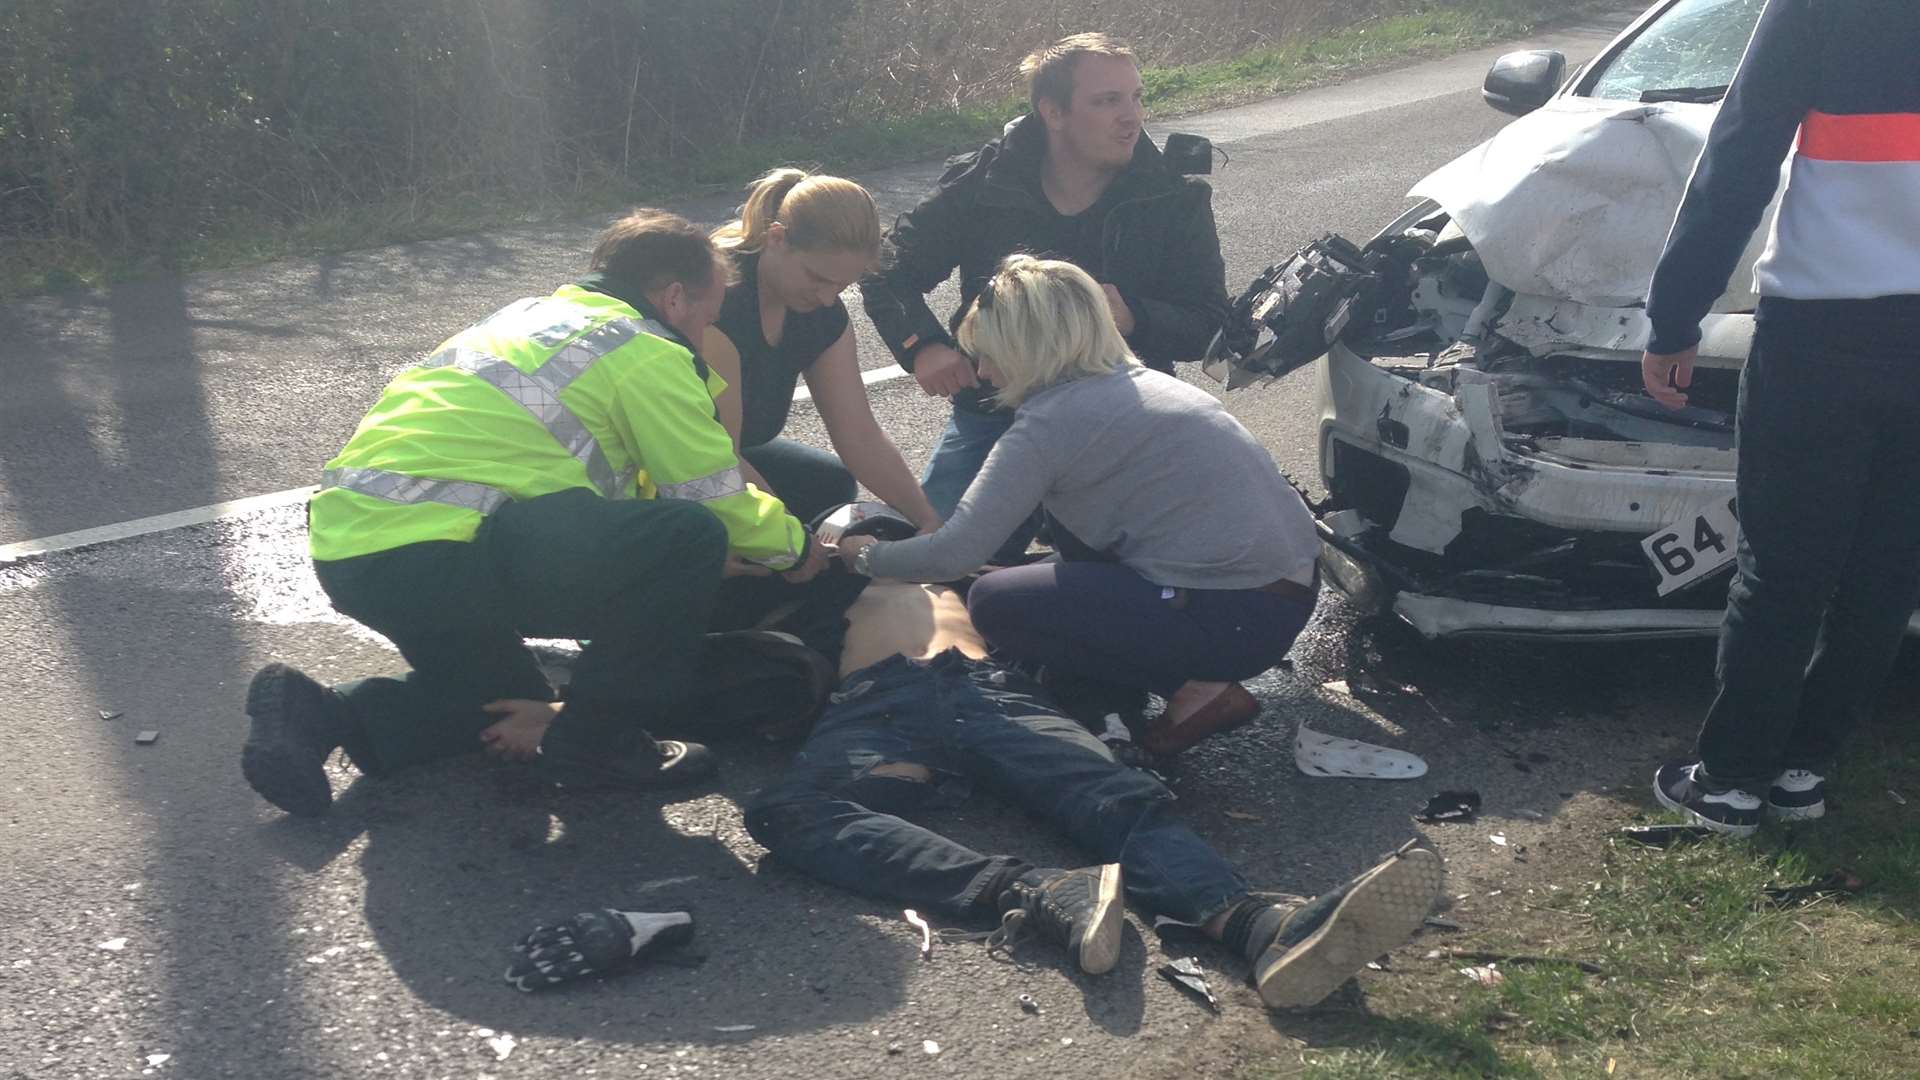 The motorcyclist was helped by passersby and paramedics